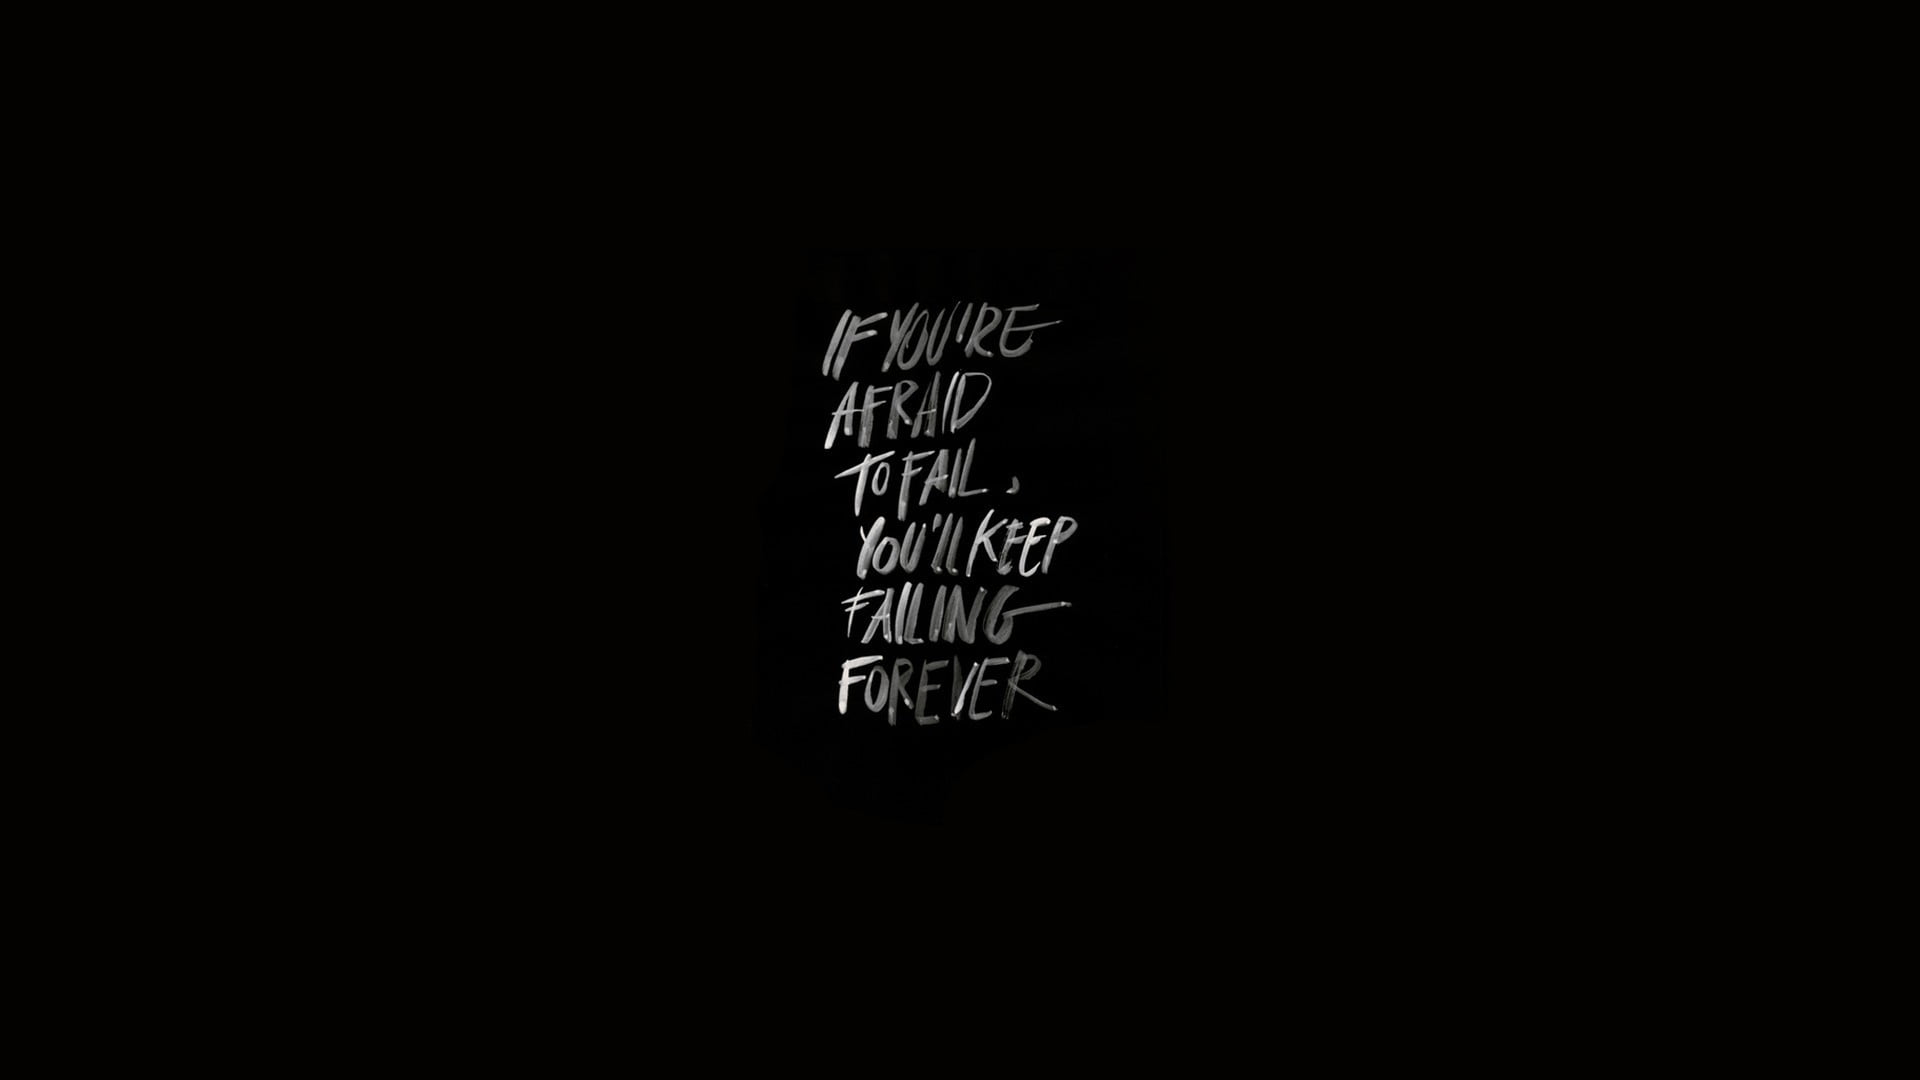 Typography Wallpaper, Quote, Minimalism, Copy Space, Black Background -  Wallpaperforu